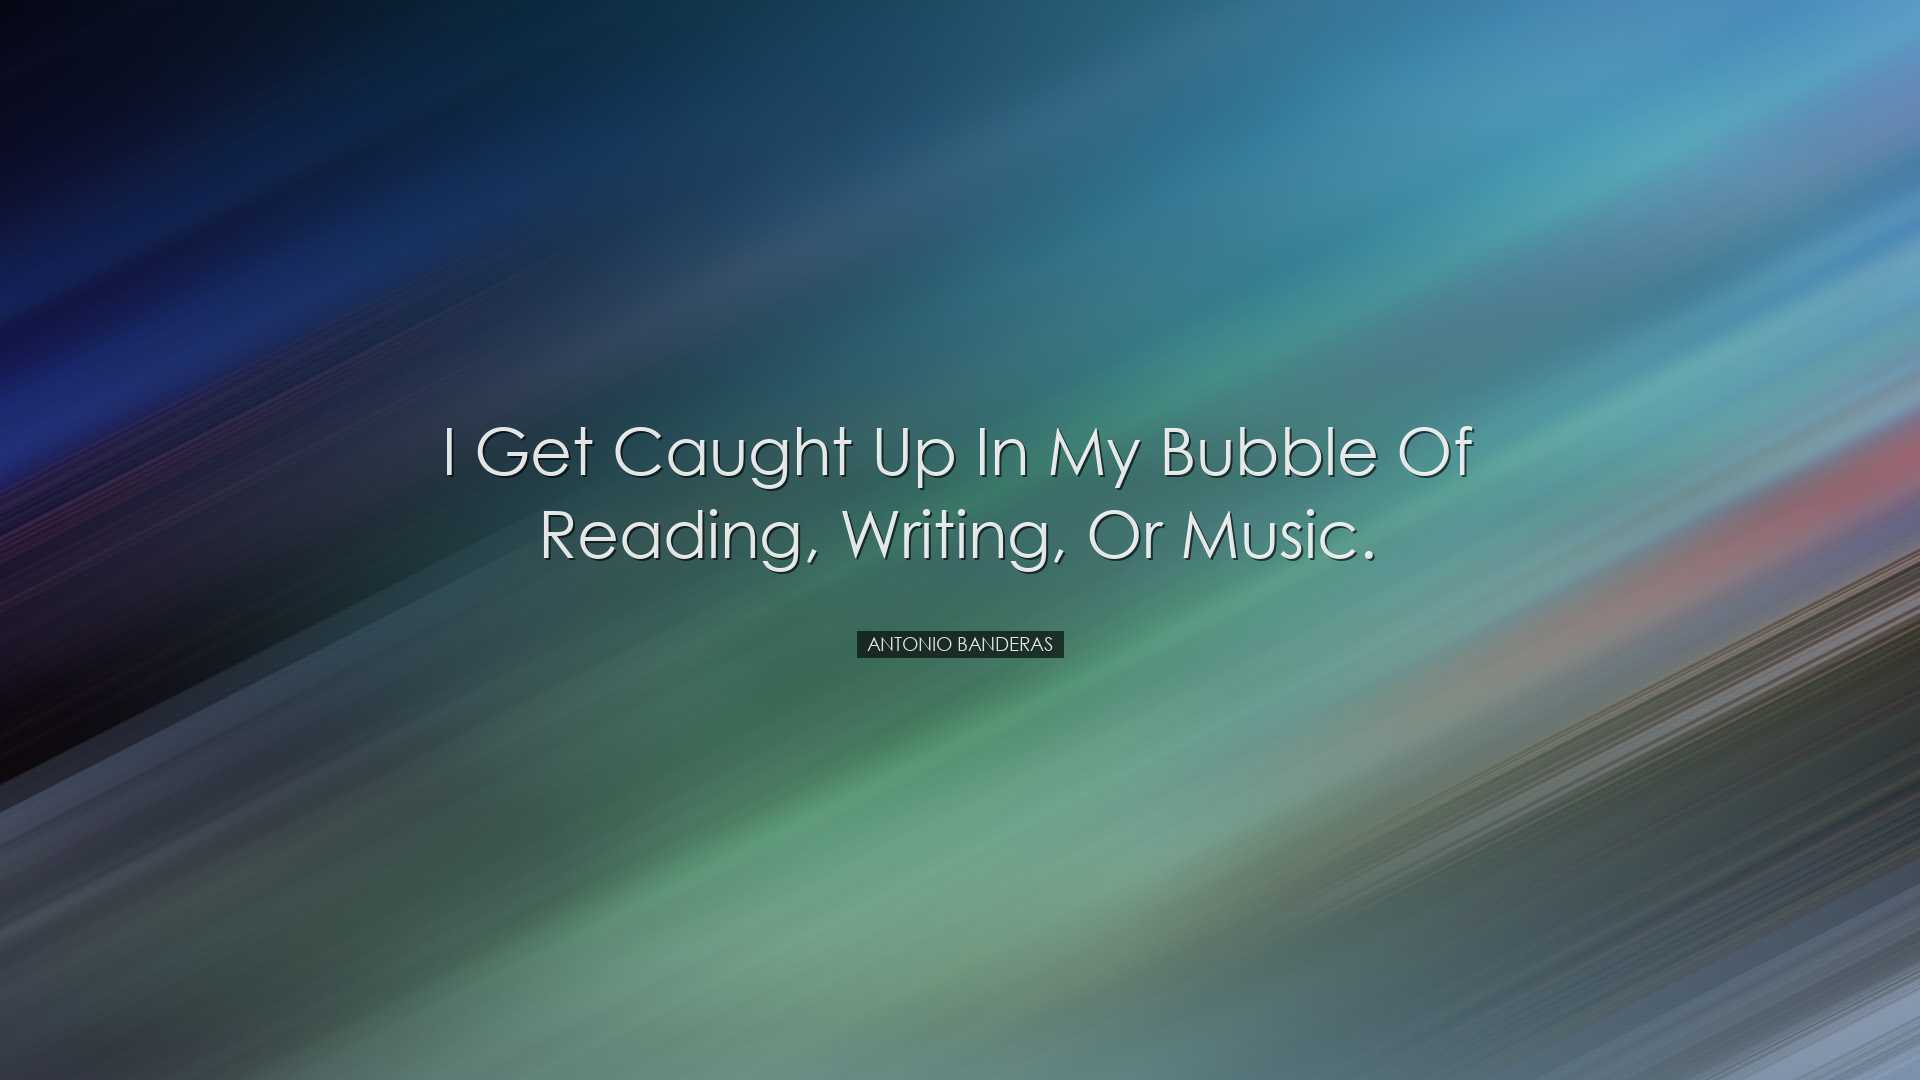 I get caught up in my bubble of reading, writing, or music. - Anto